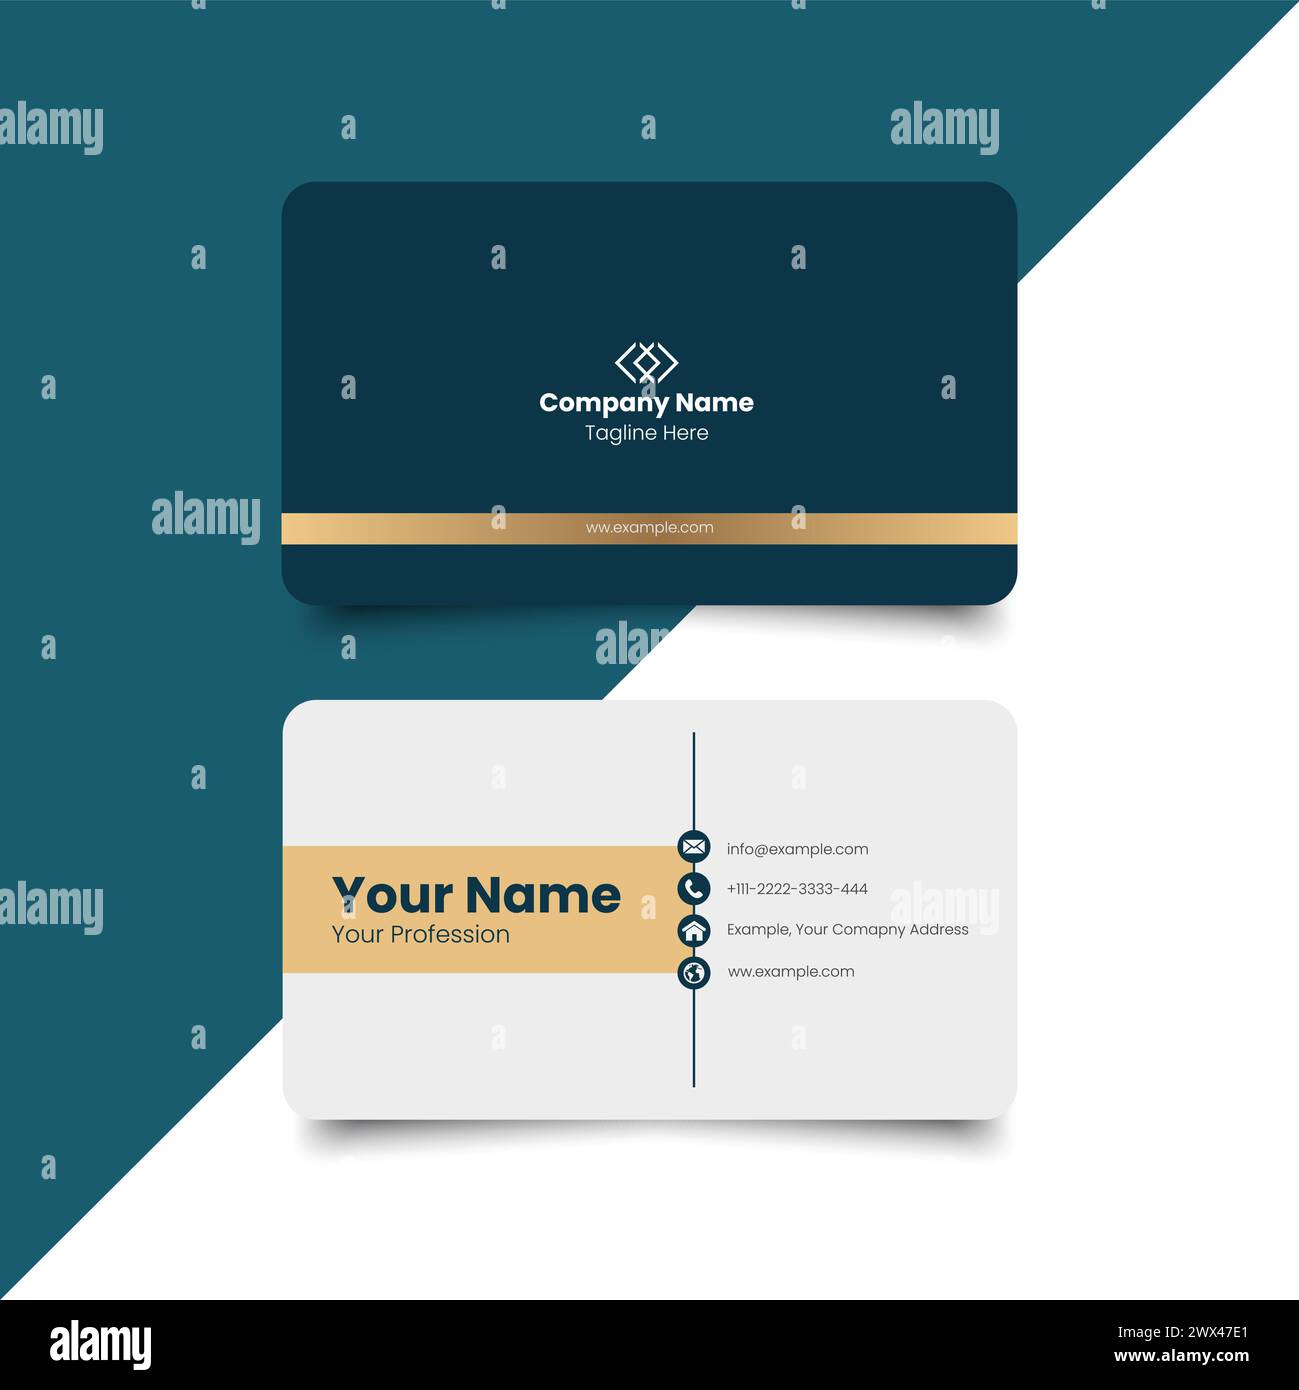 Web Simple Business Card Layout. creative modern name card and business card. Clean Design. corporate design template,Clean professional business card Stock Vector